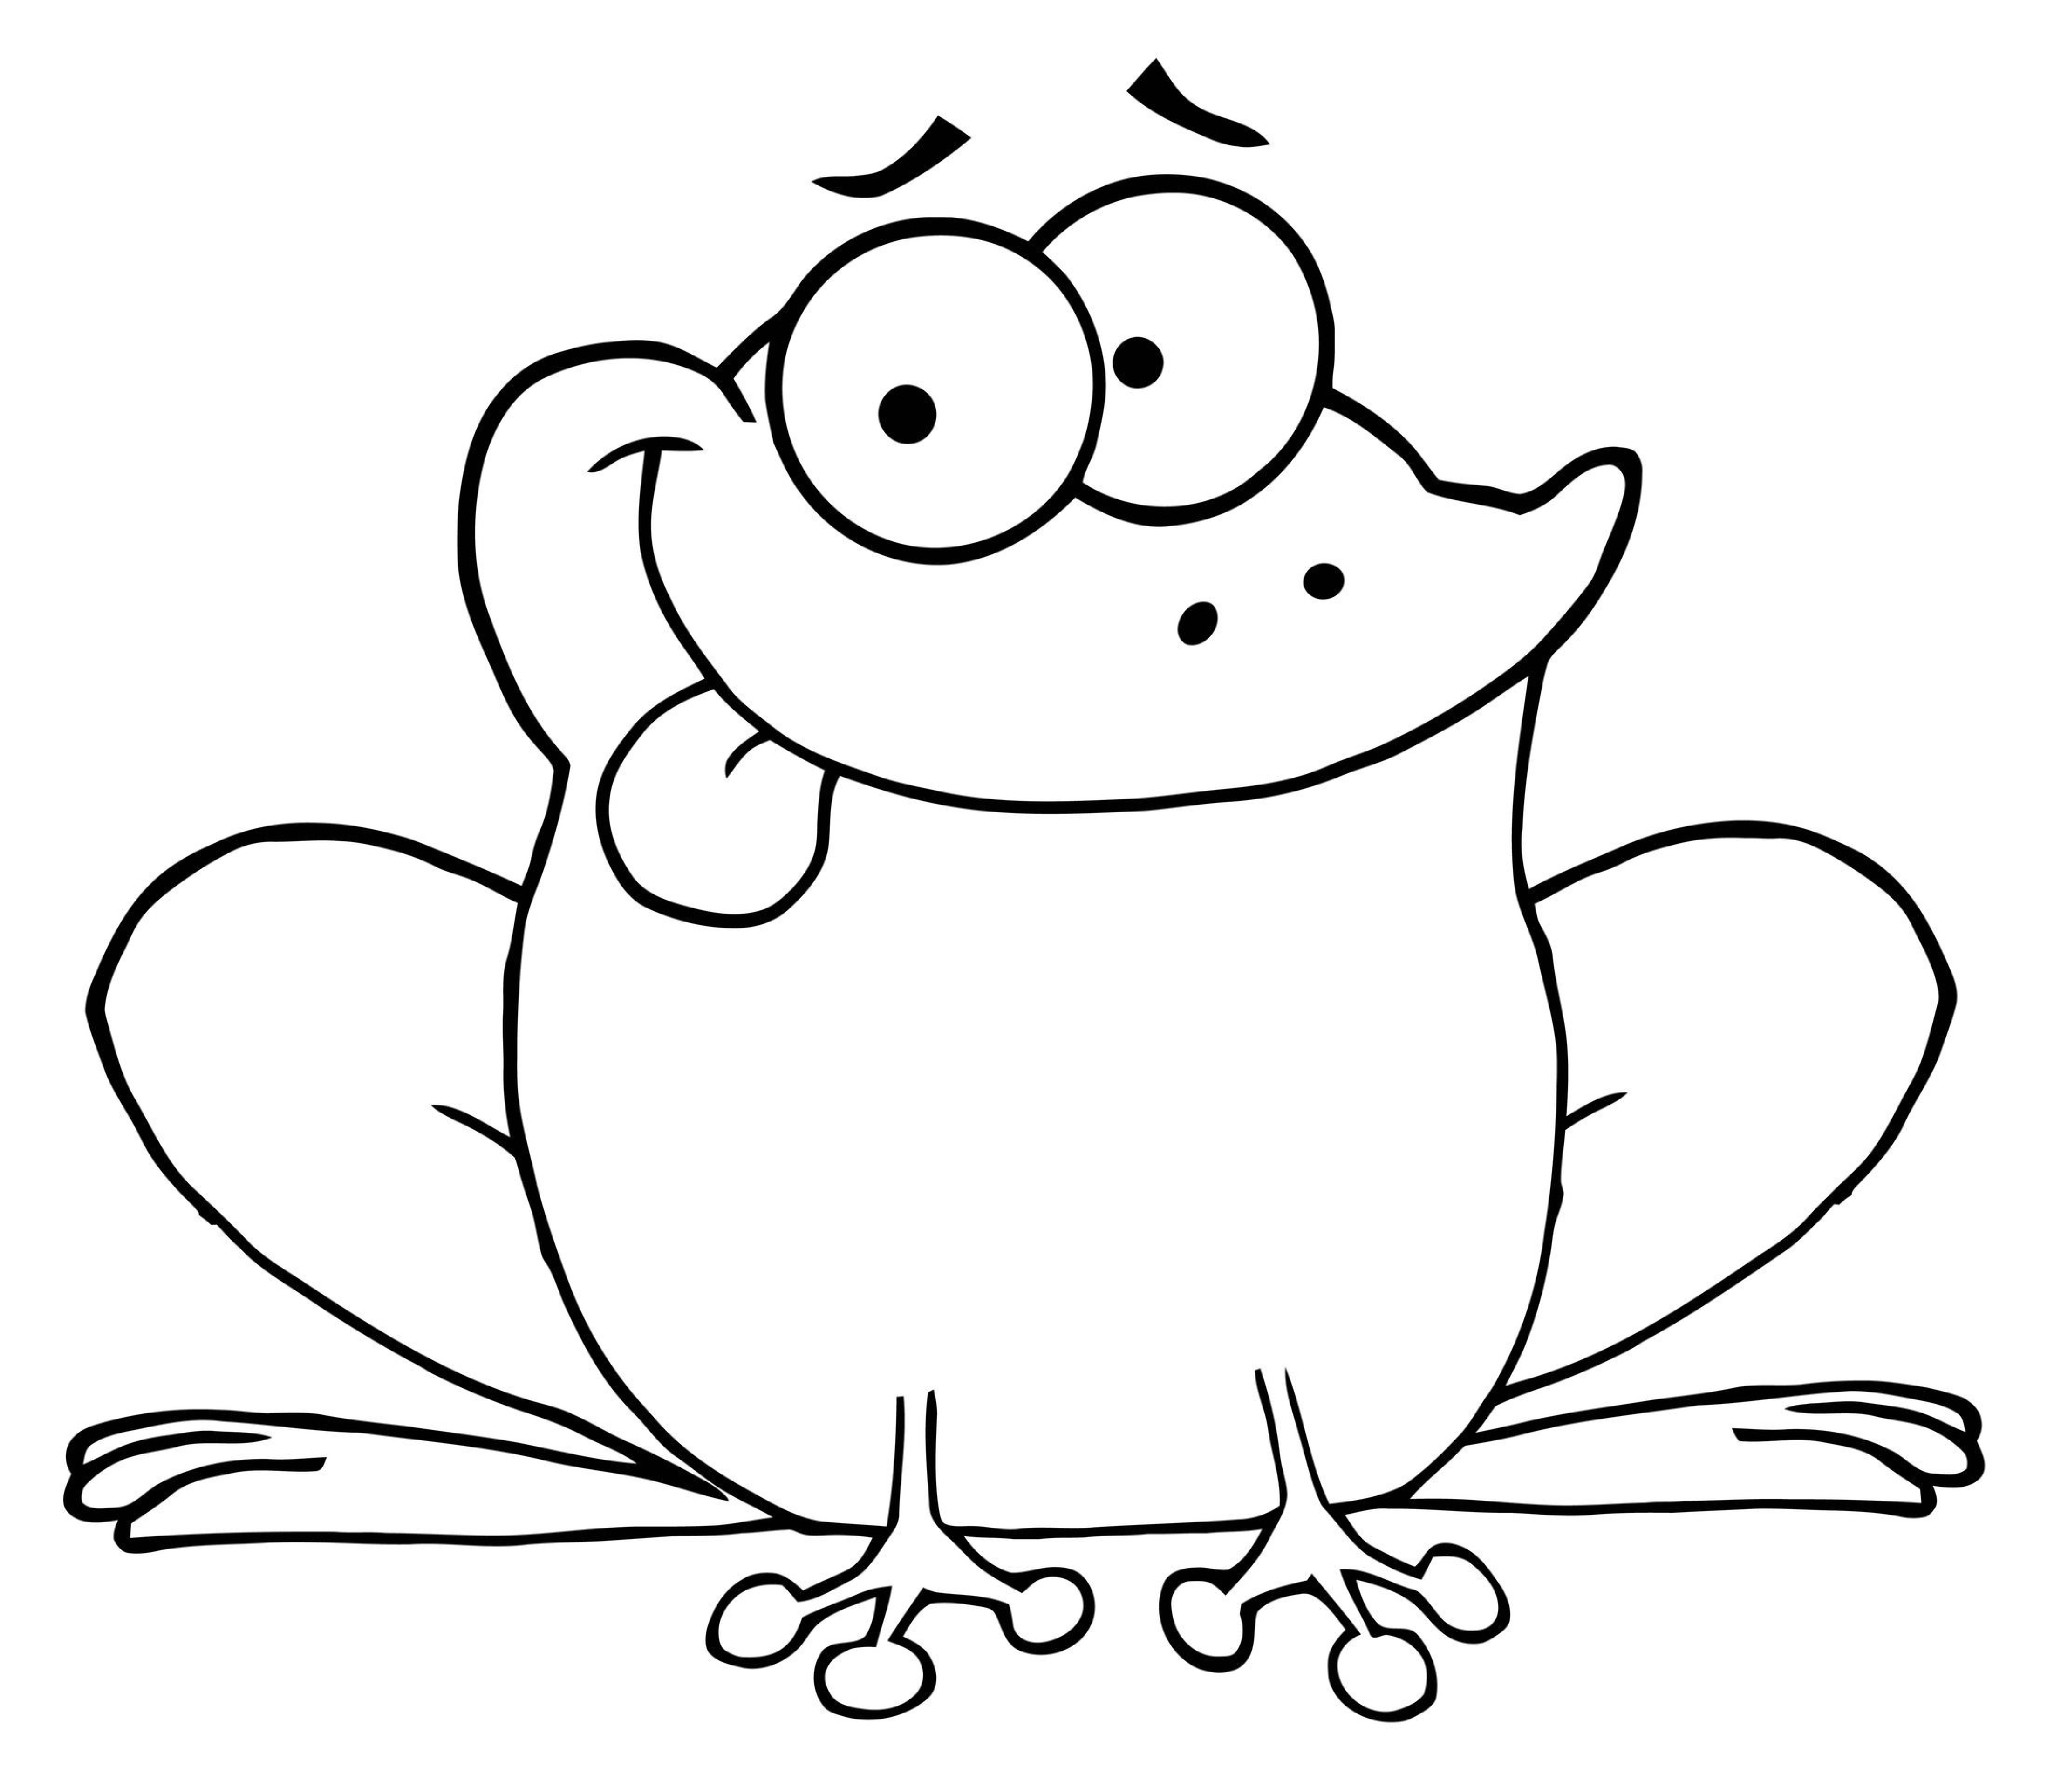 Baby Frog Coloring Pages
 Frogs coloring pages to and print for free